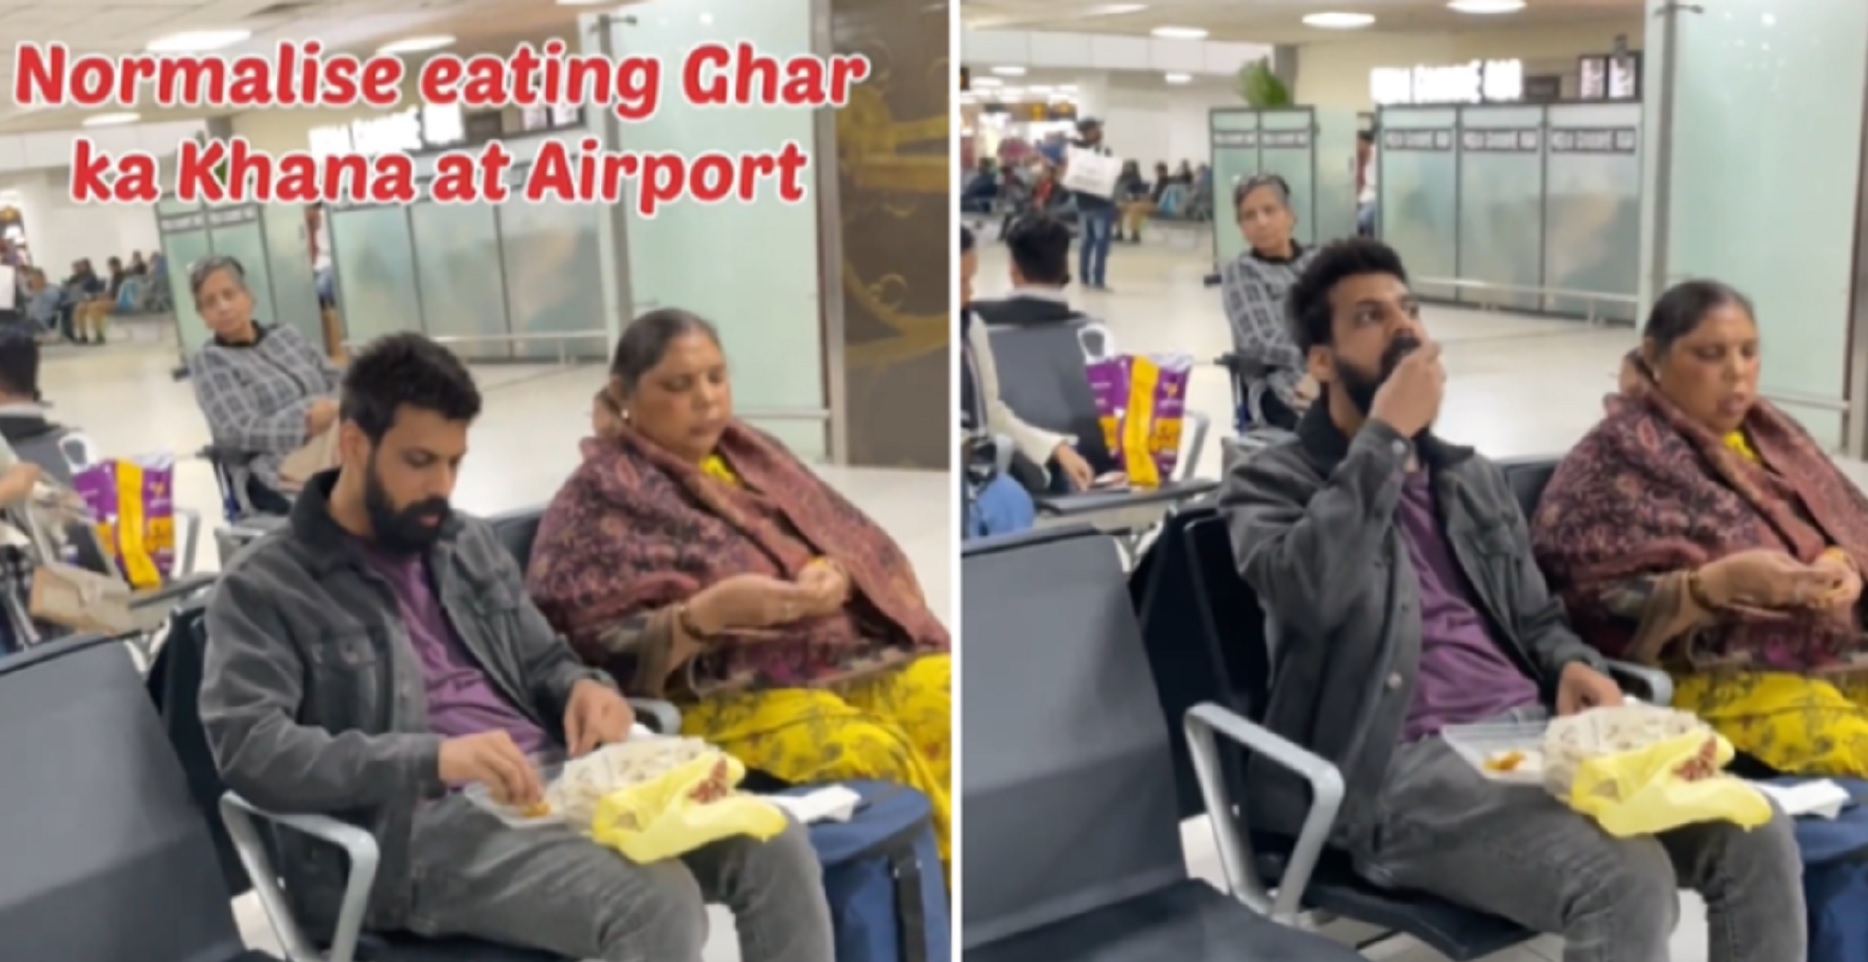 Man Complains About Over-Priced Food At Airports, Eats ‘Ghar Ka Khana’ With His Mother [Video]